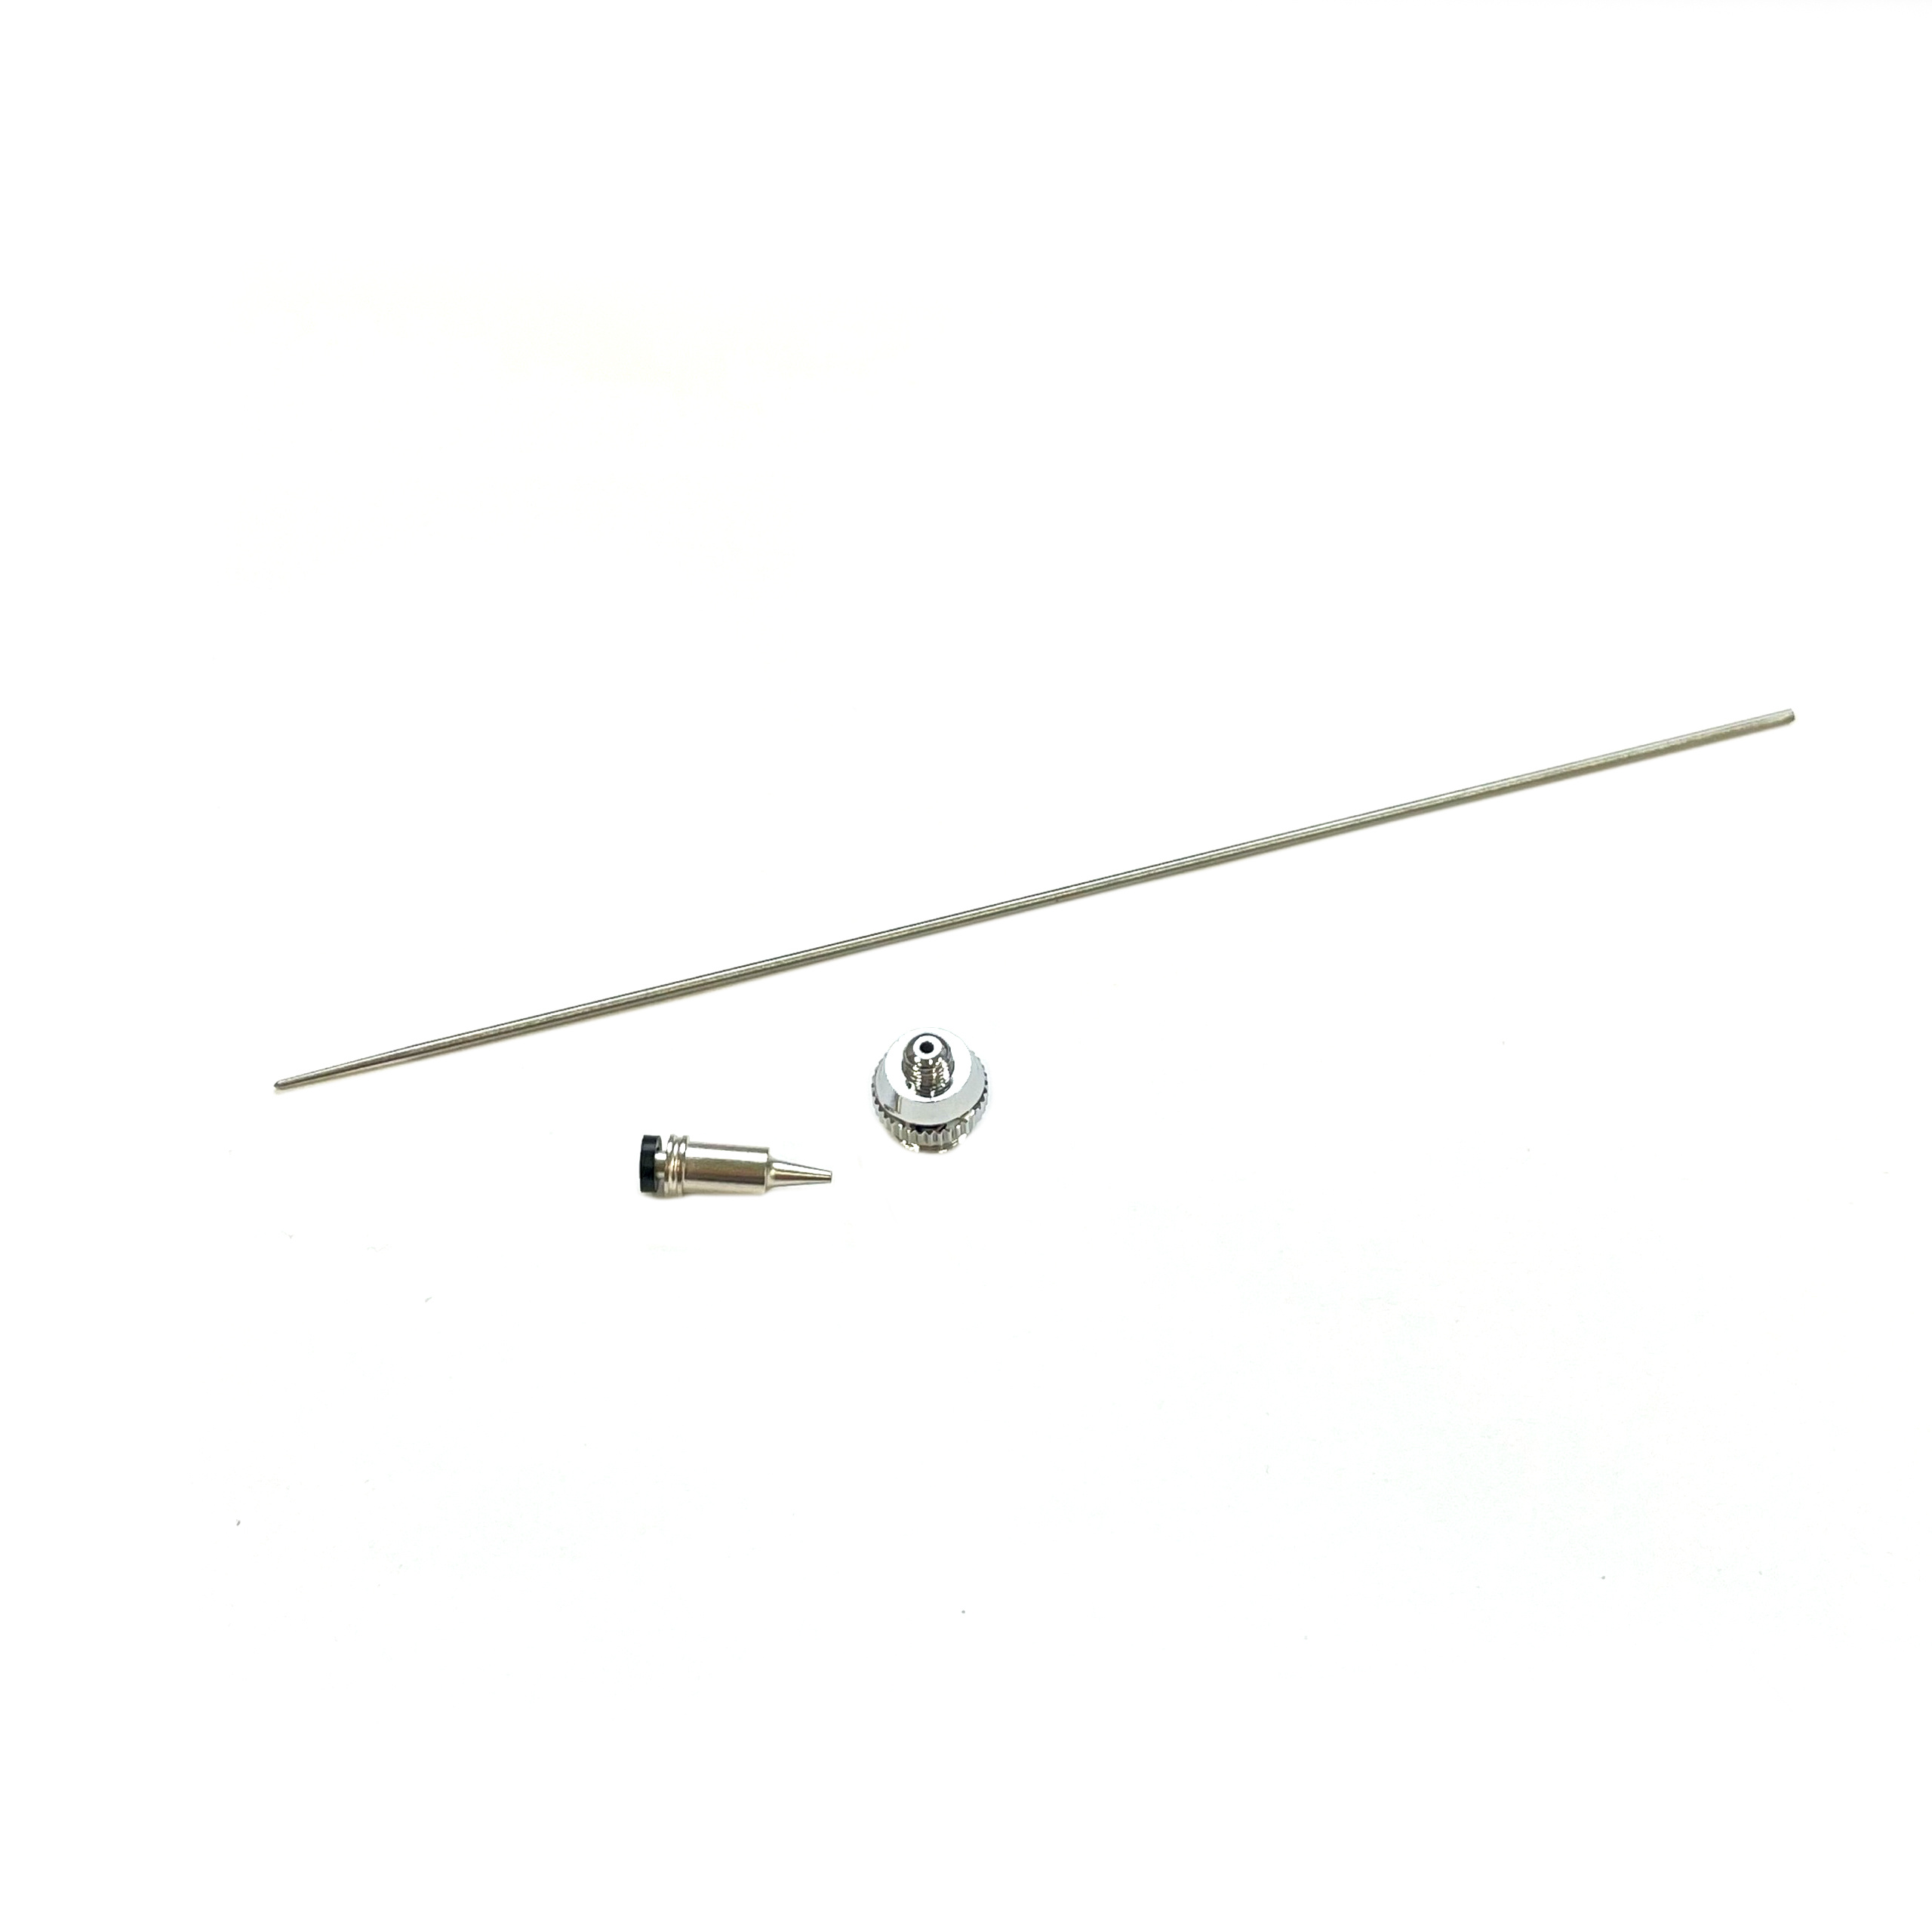 5598 Jas Airbrush kit, 0.8mm (high-strength needle, nozzle, diffuser)